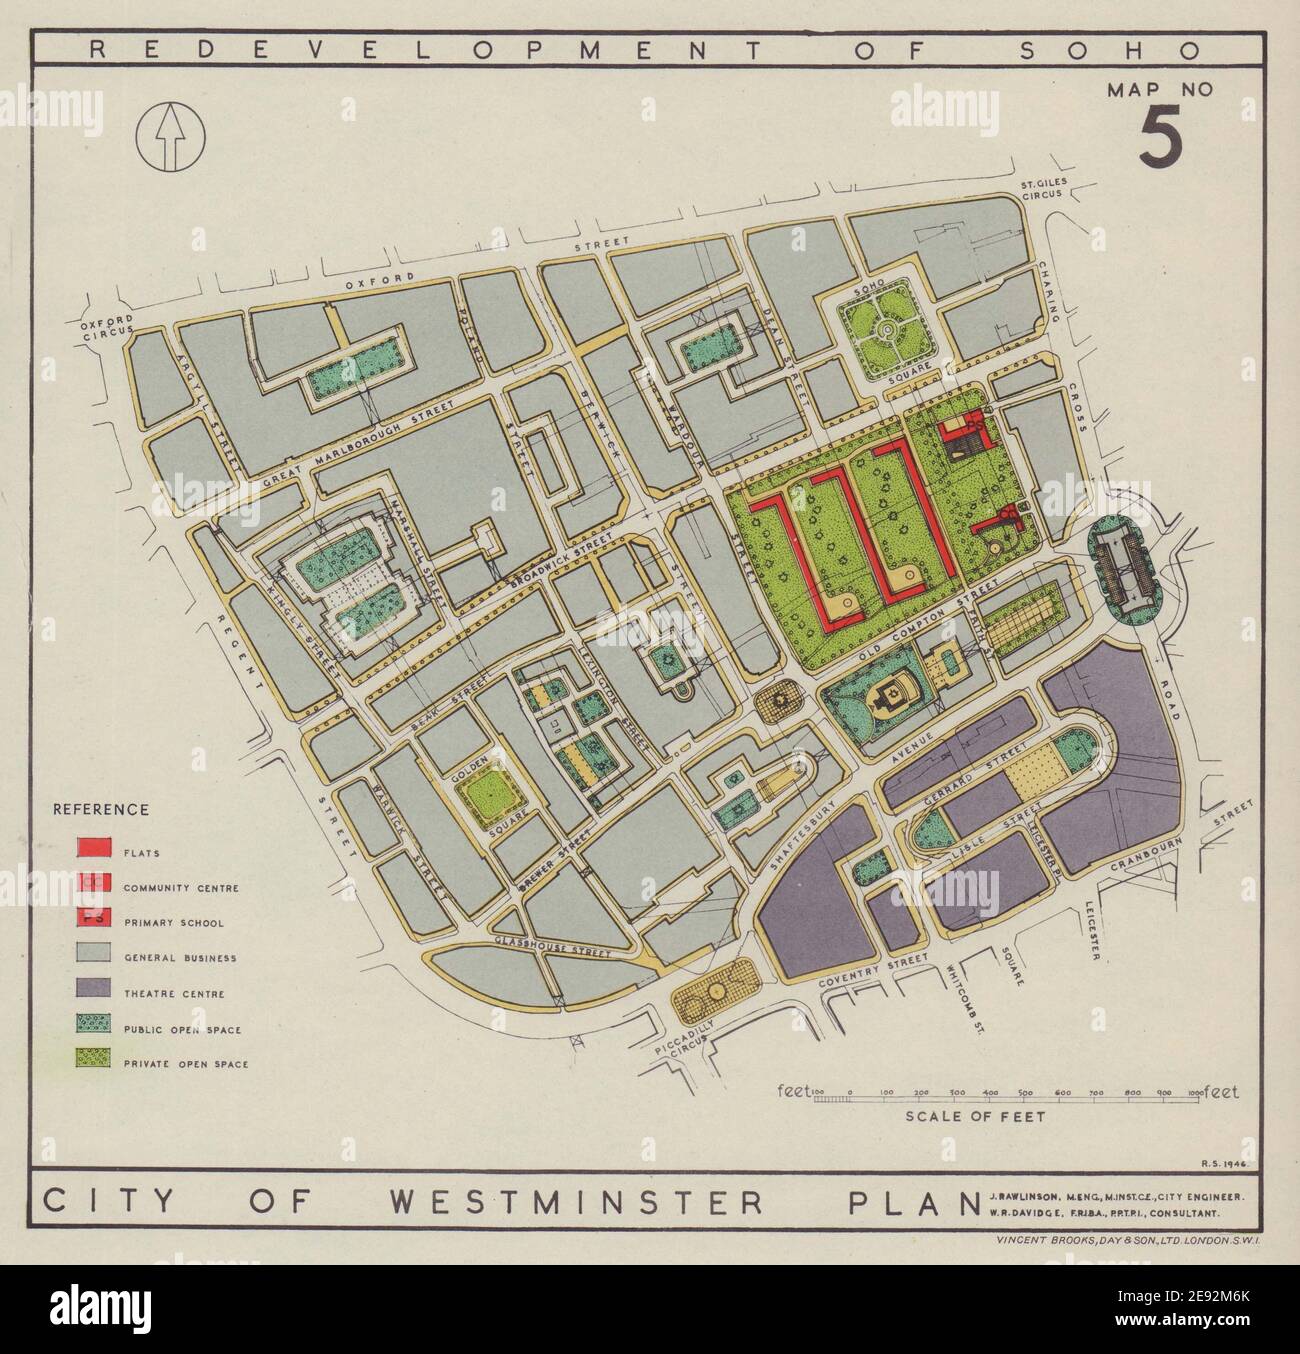 Redevelopment of Soho. City of Westminster plan. RAWLINSON 1946 old map Stock Photo